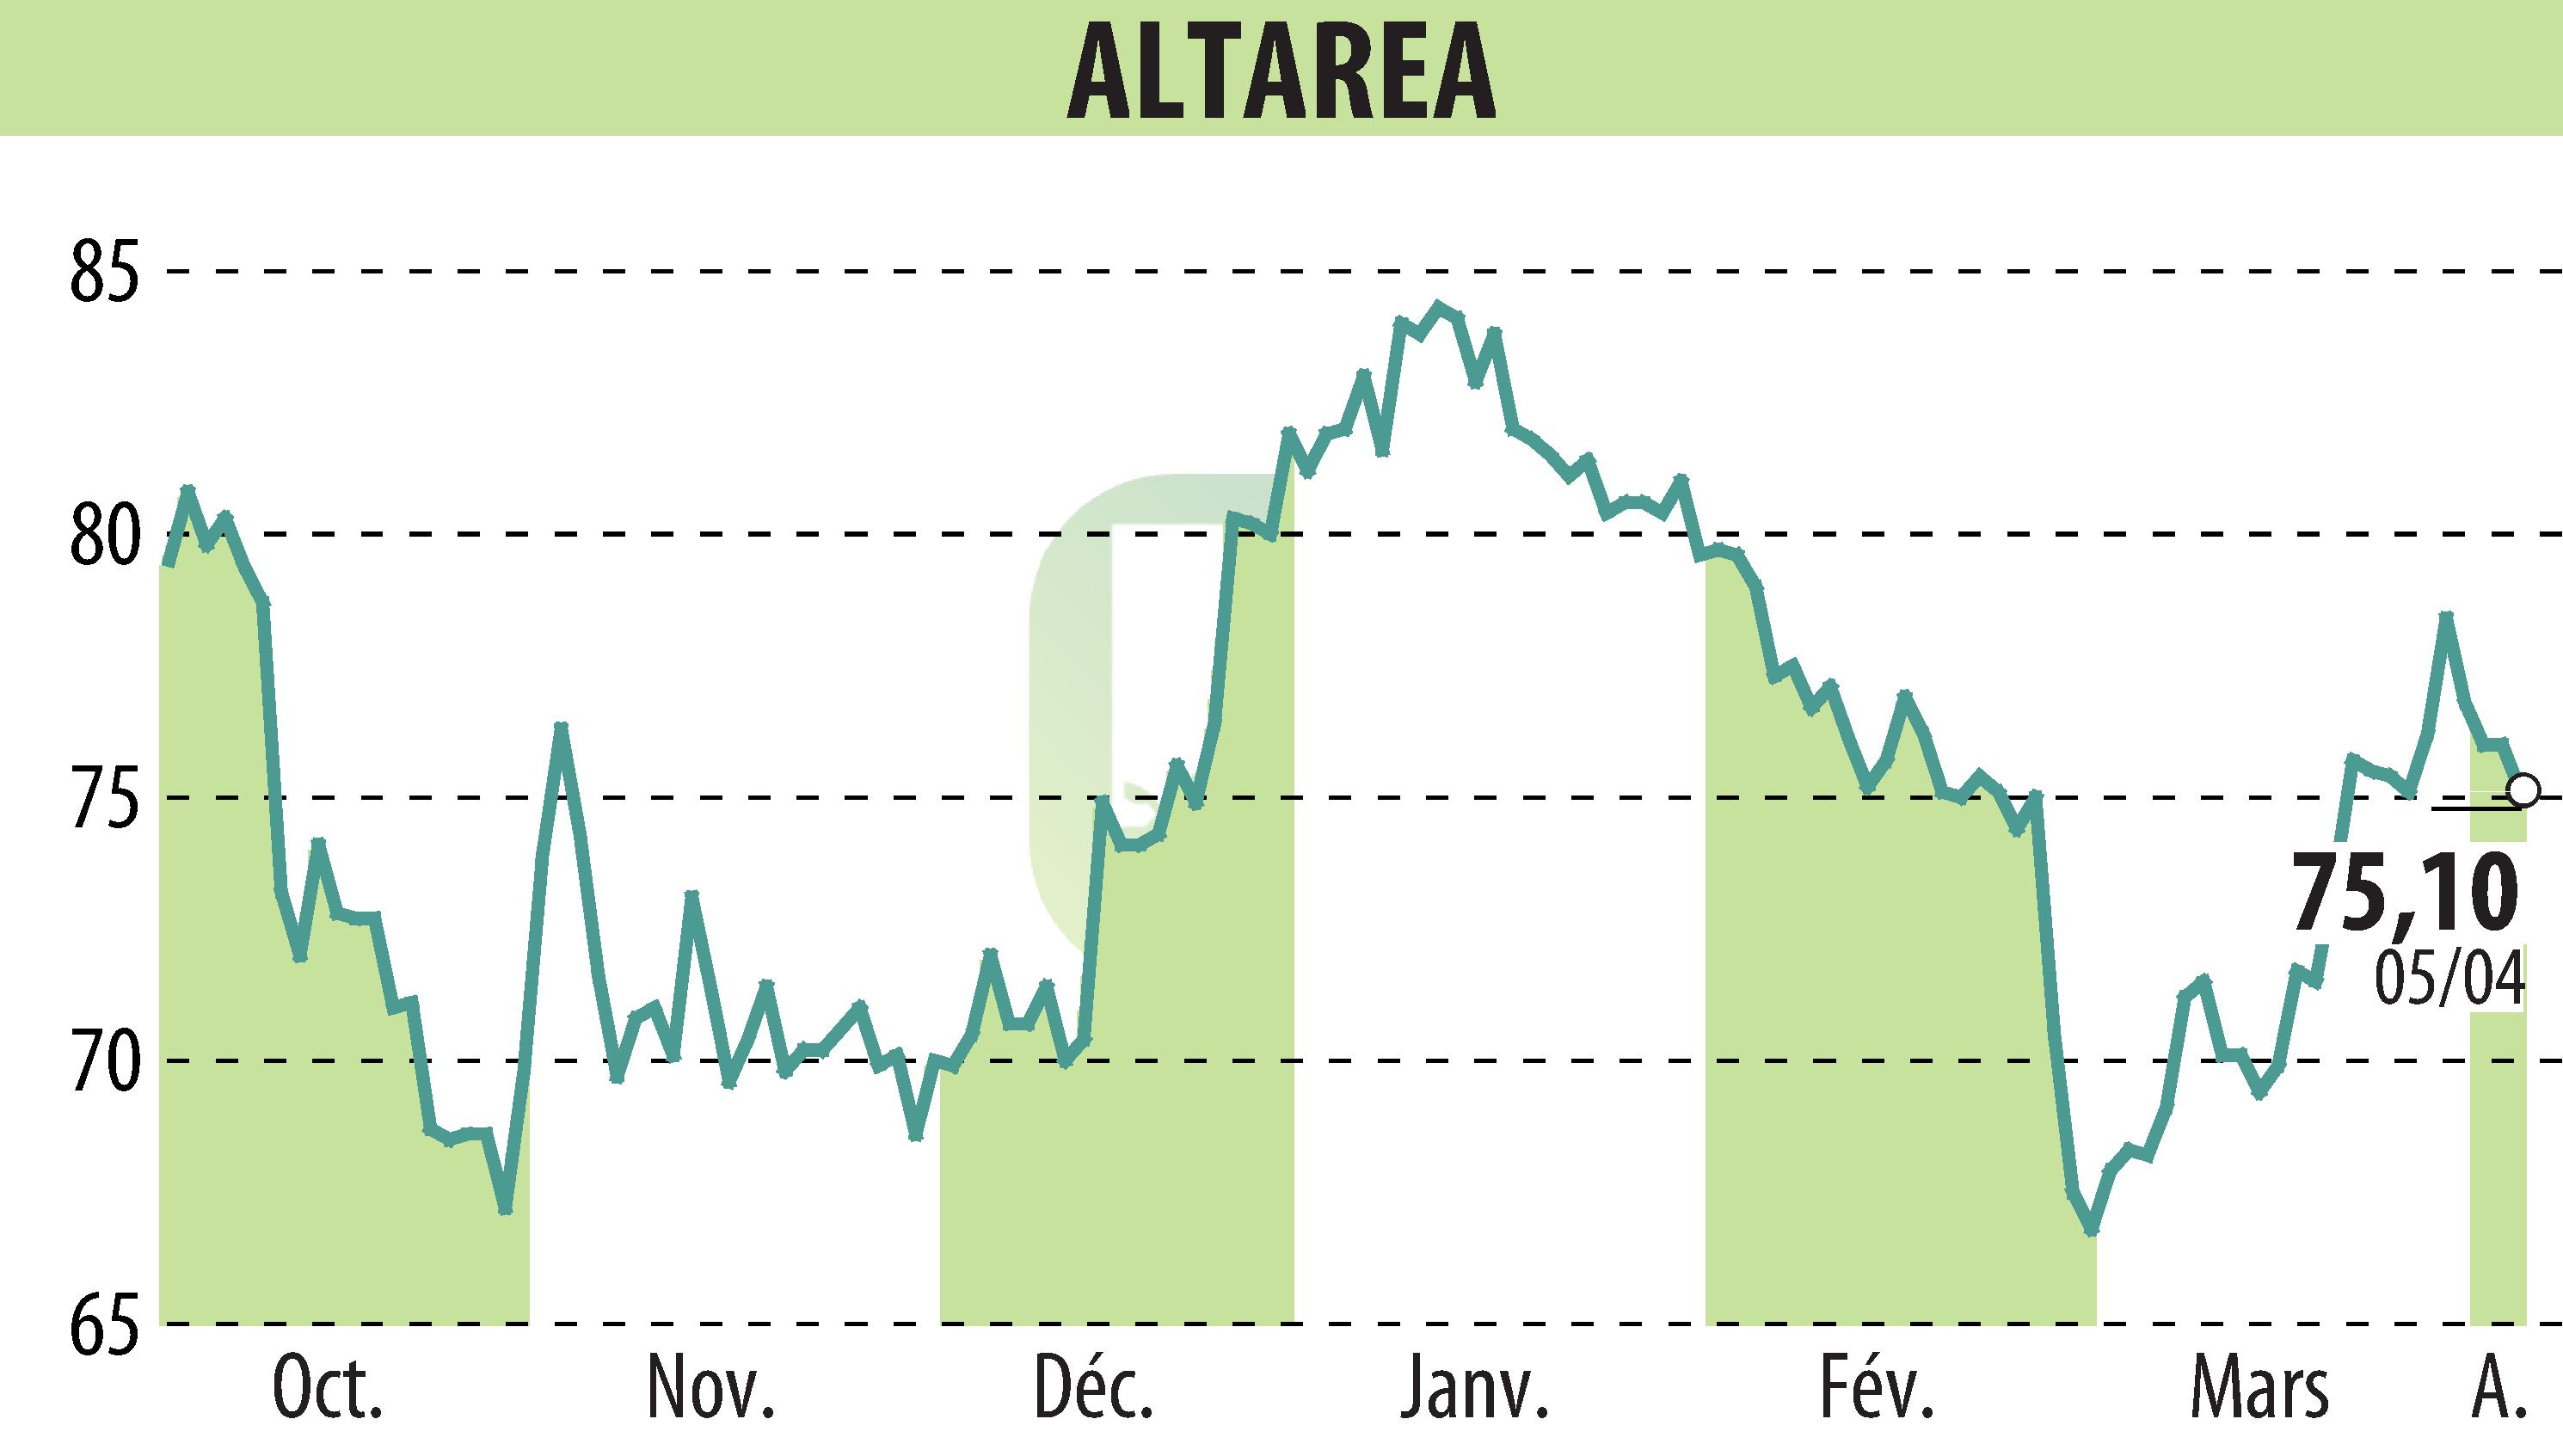 Stock price chart of ALTAREA (EPA:ALTA) showing fluctuations.